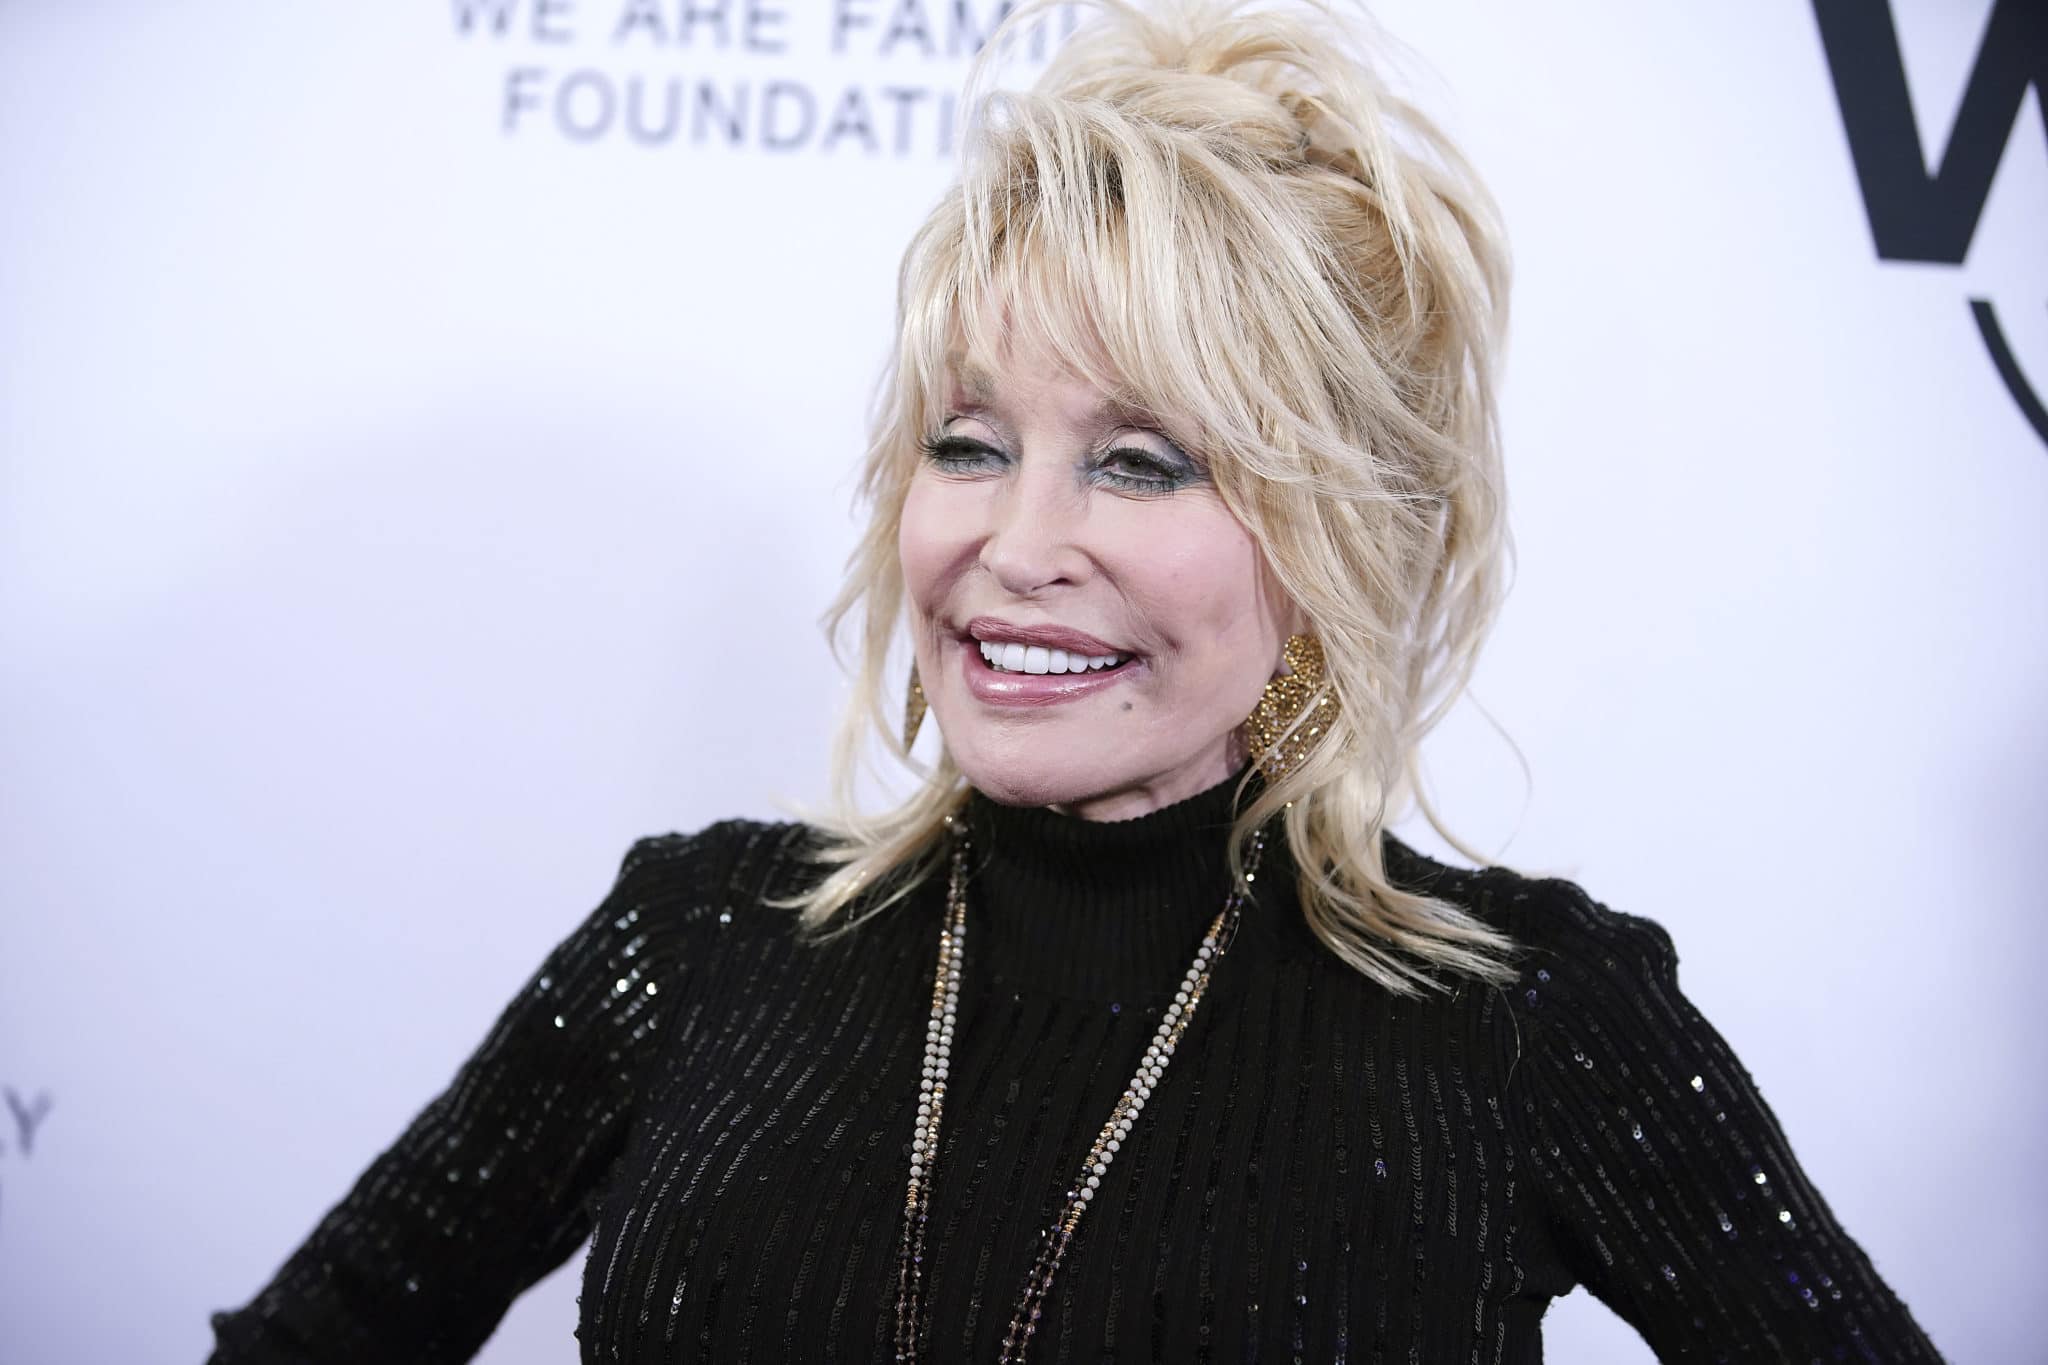 Obama said COVID vaccine hero Dolly Parton should get a presidential medal of freedom